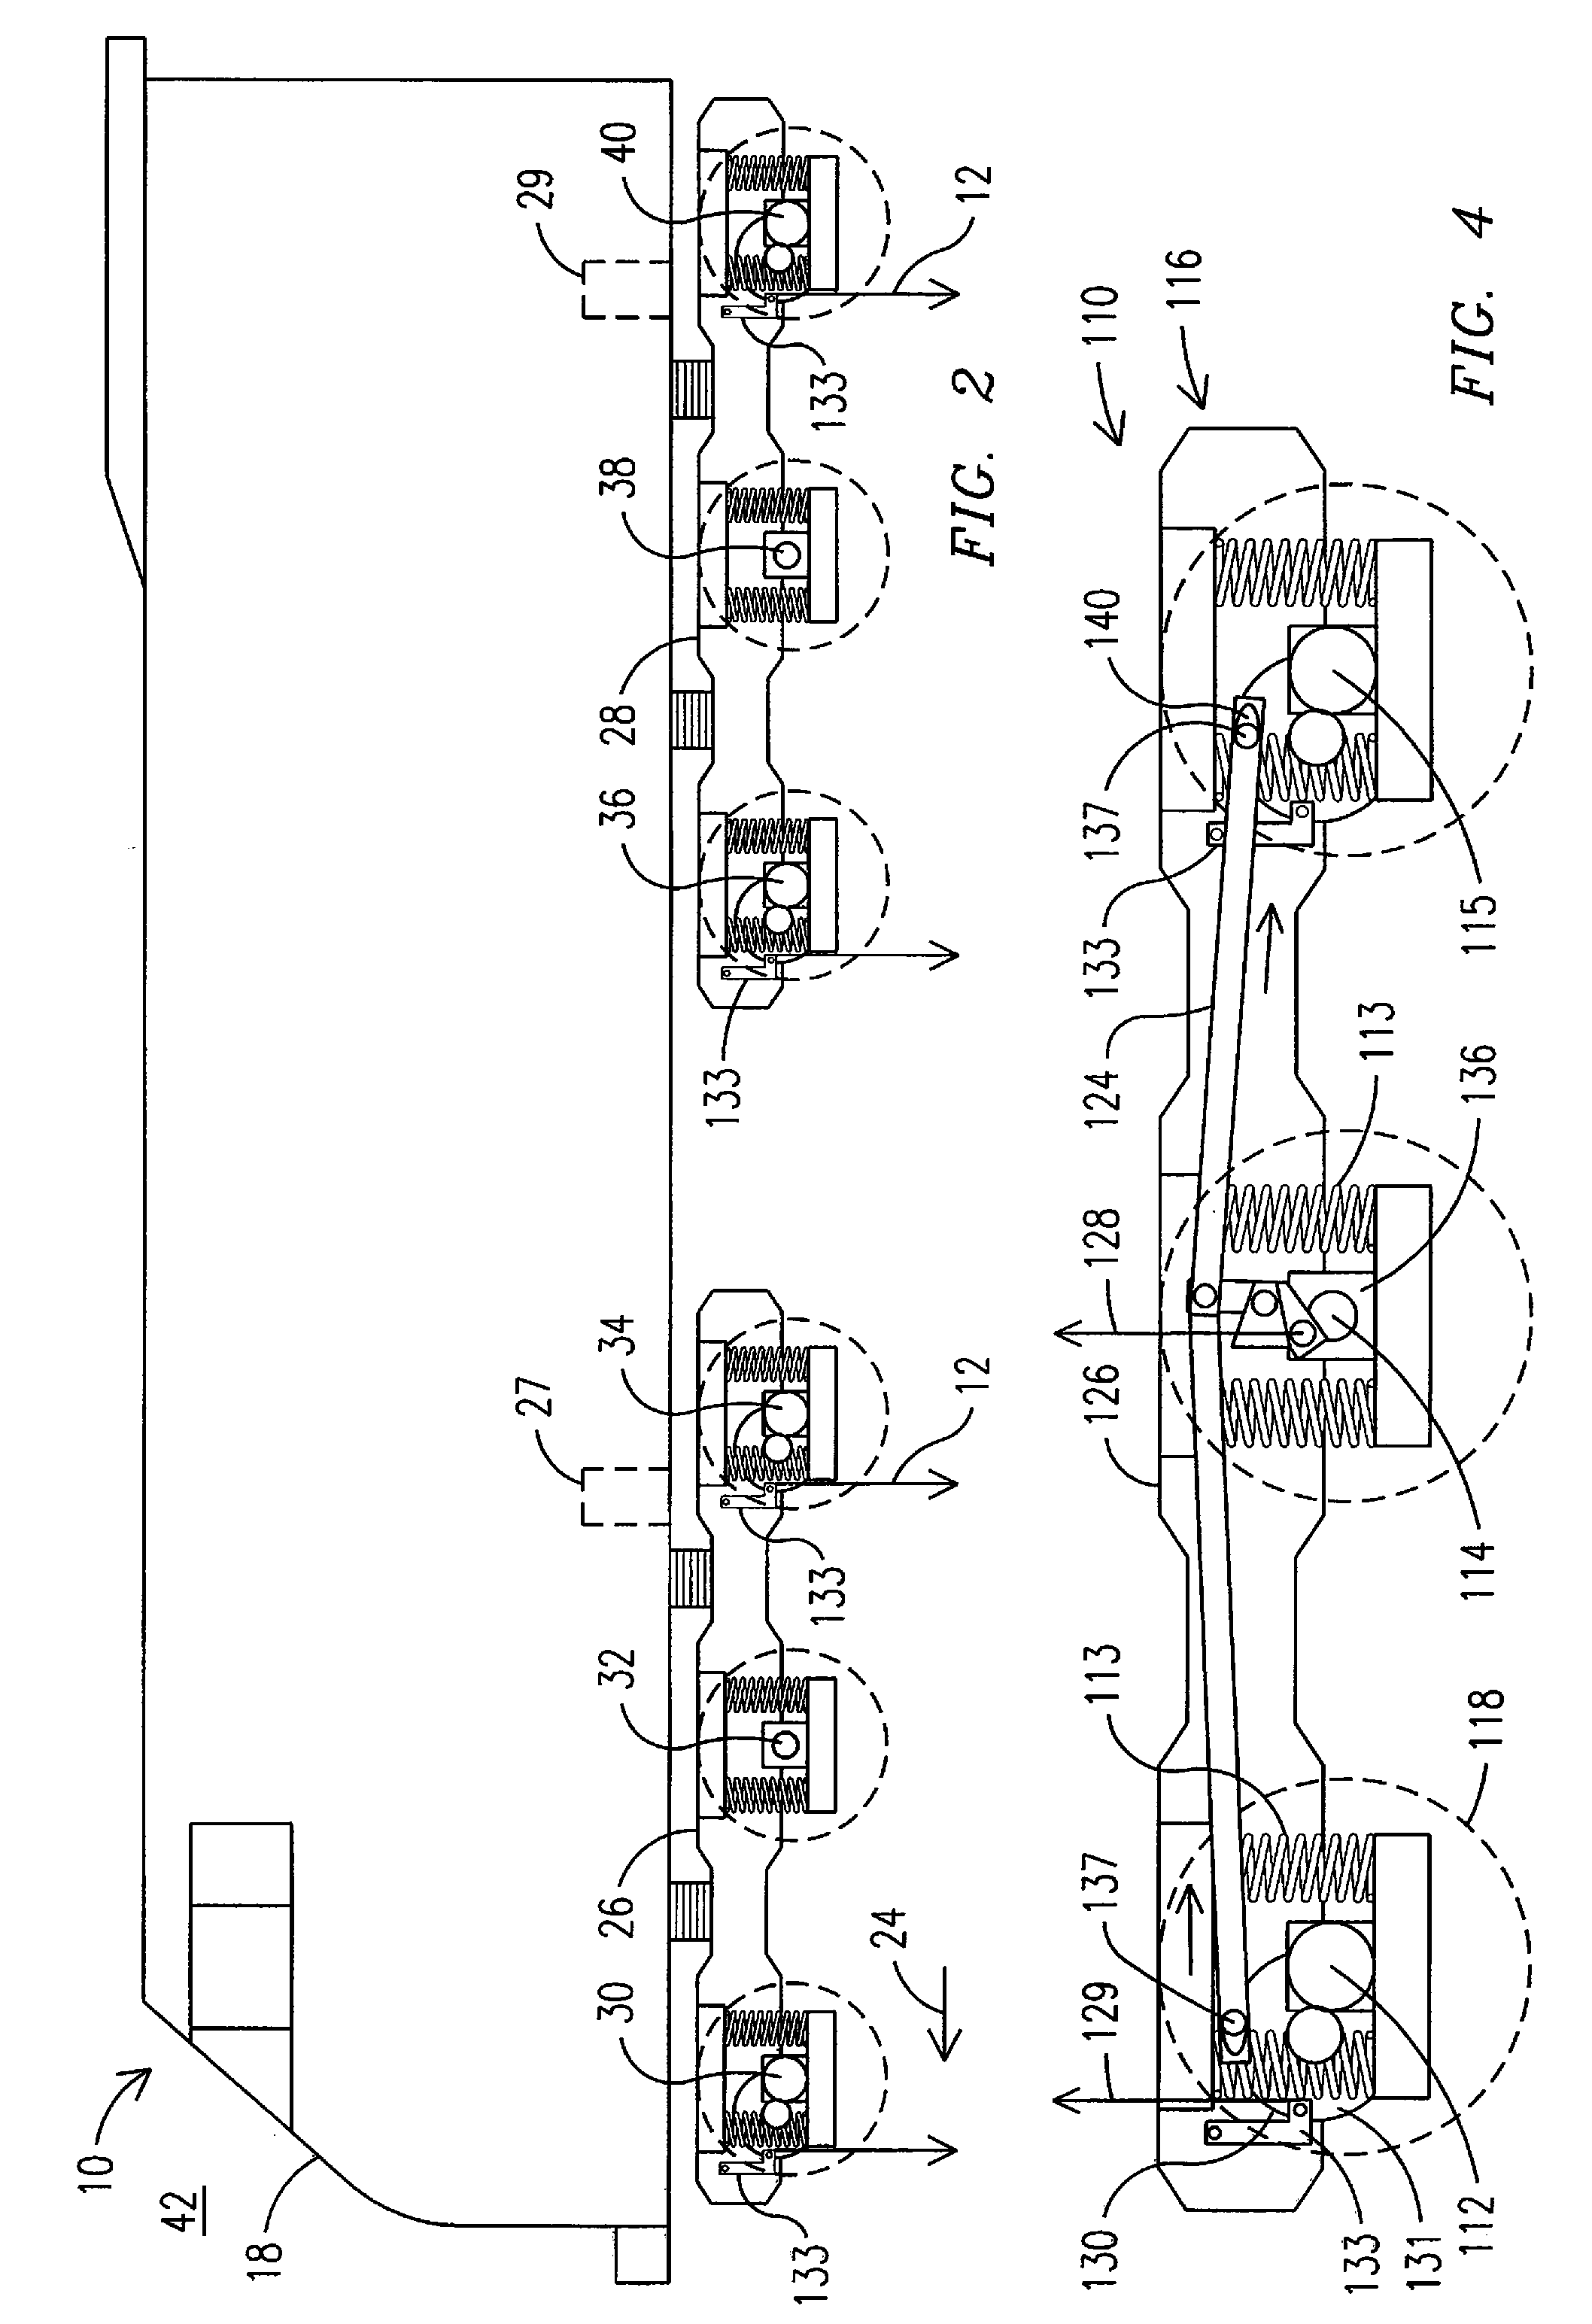 System and method for dynamically coupling two or more axles of a rail vehicle